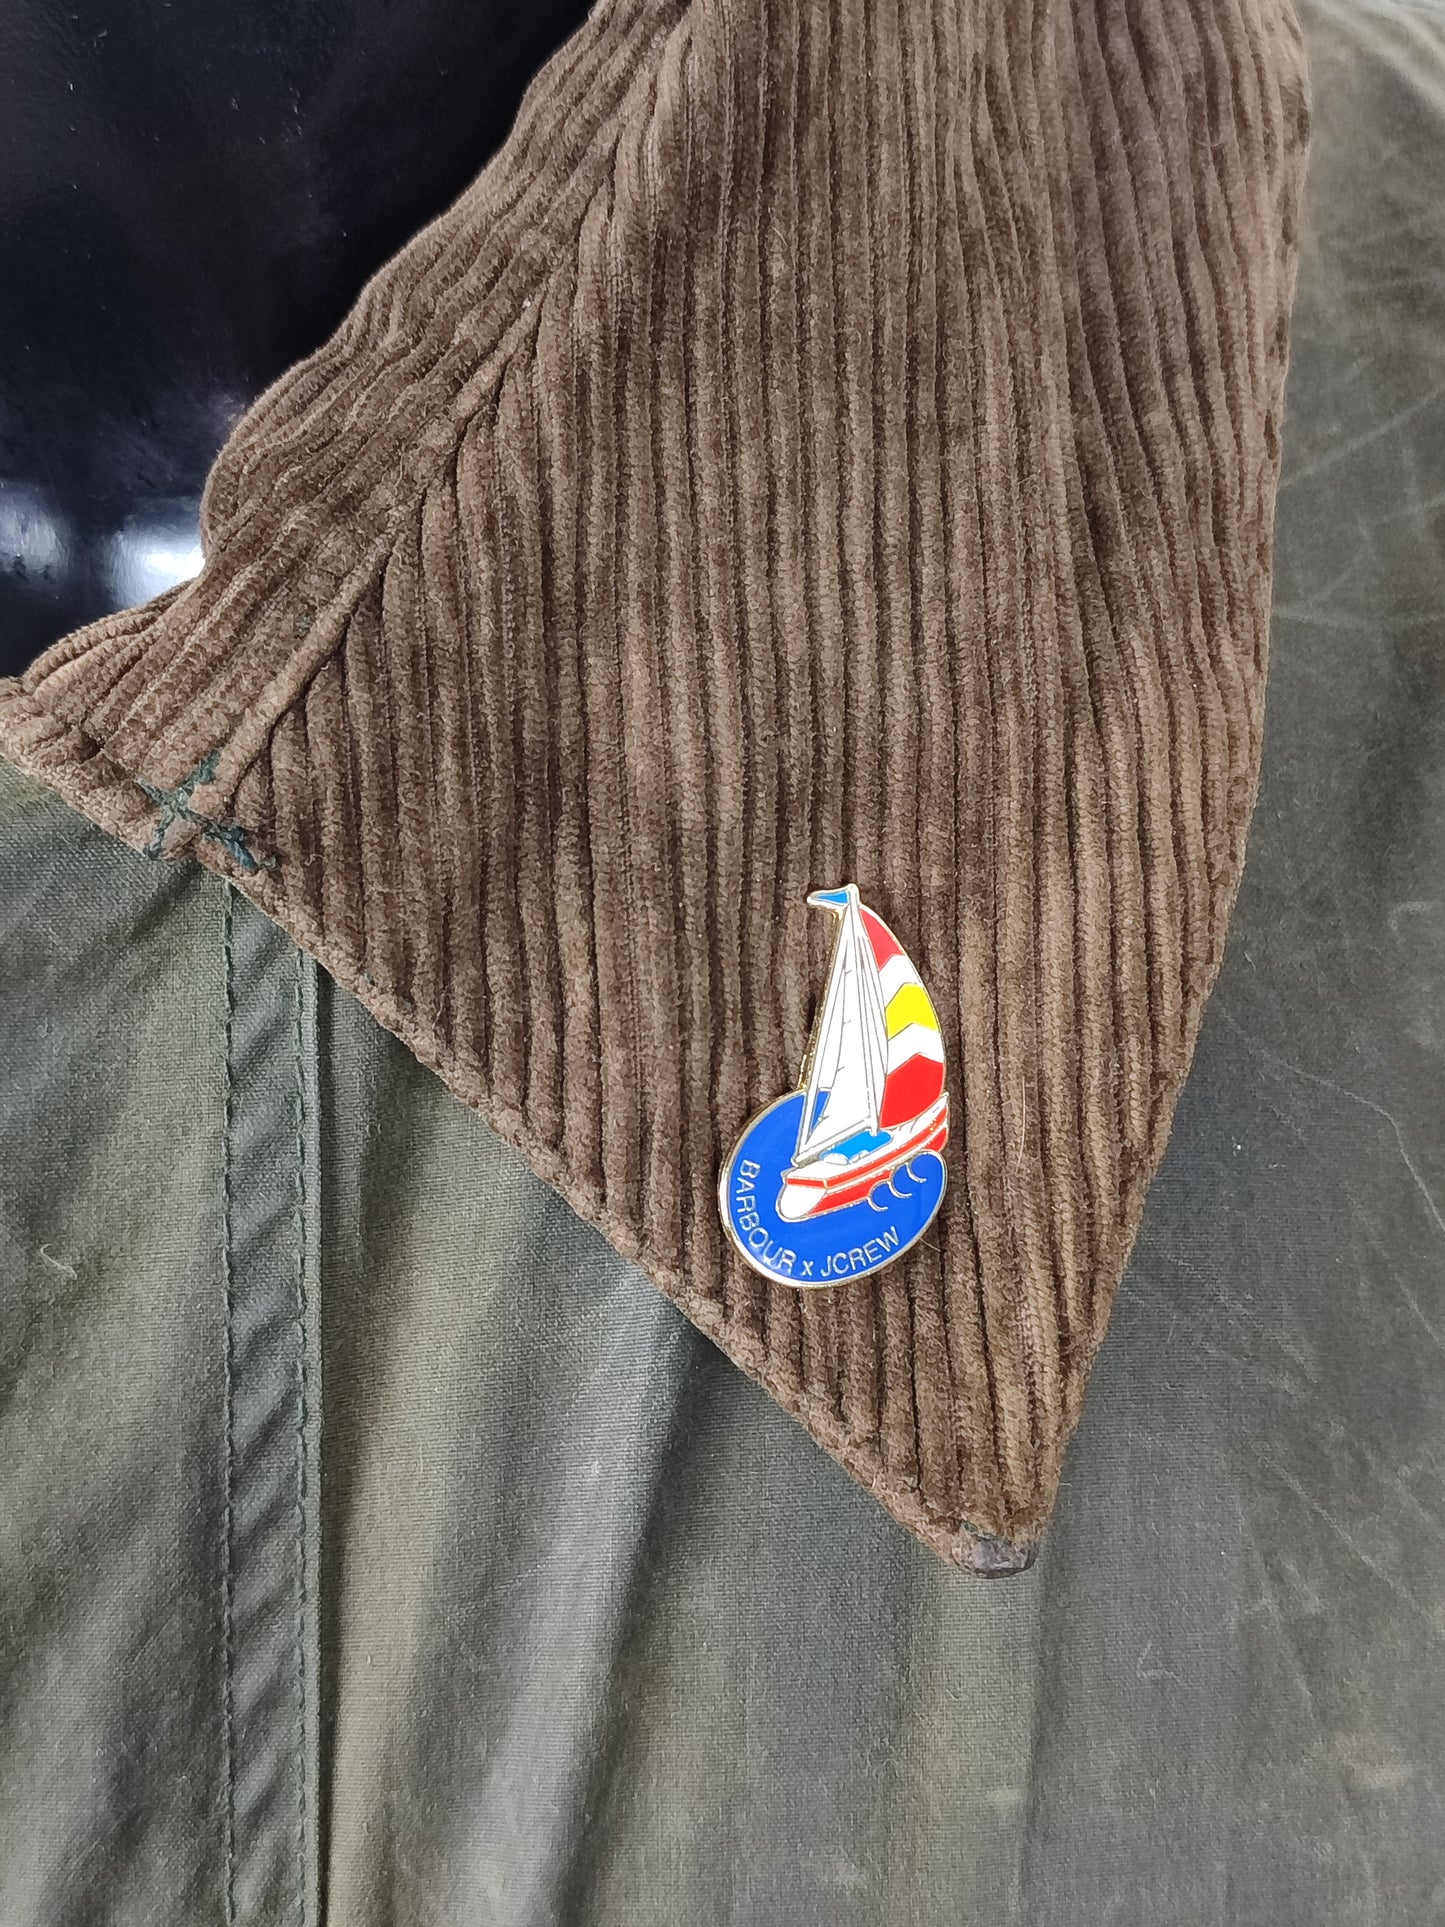 Spilla Barbour Barca - Boat Pin